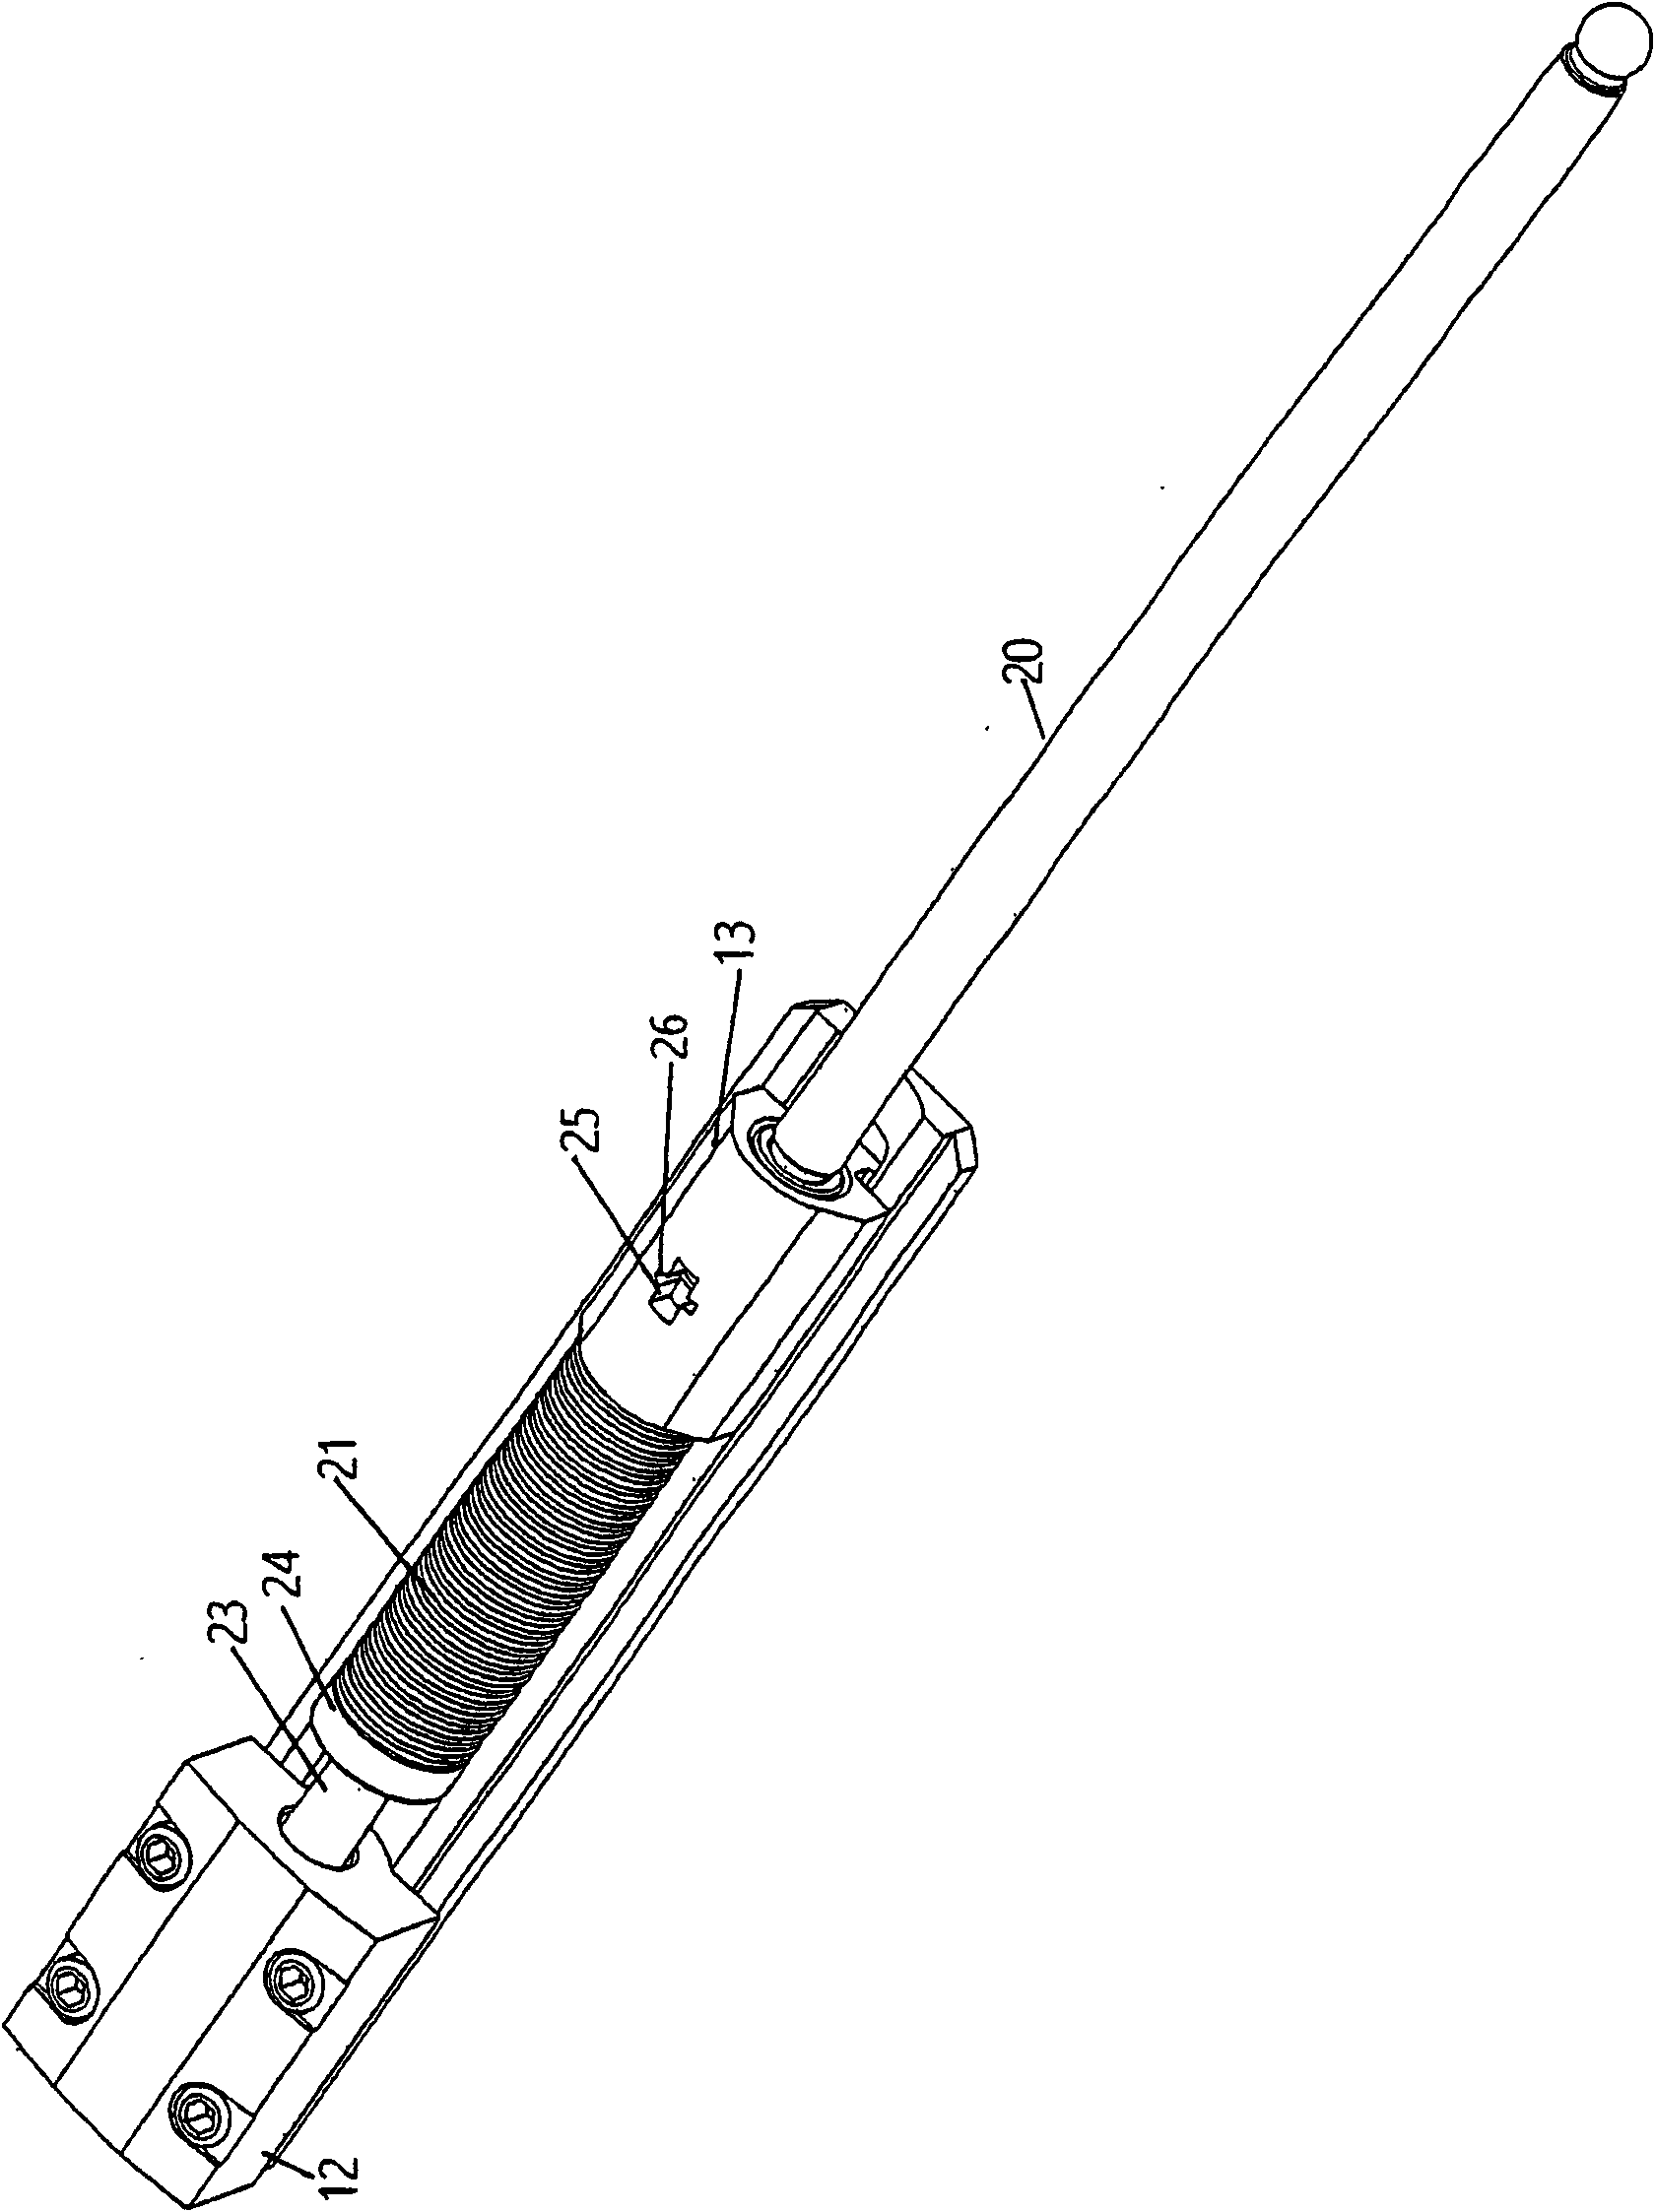 Load alleviation assembly for a window, door or similar